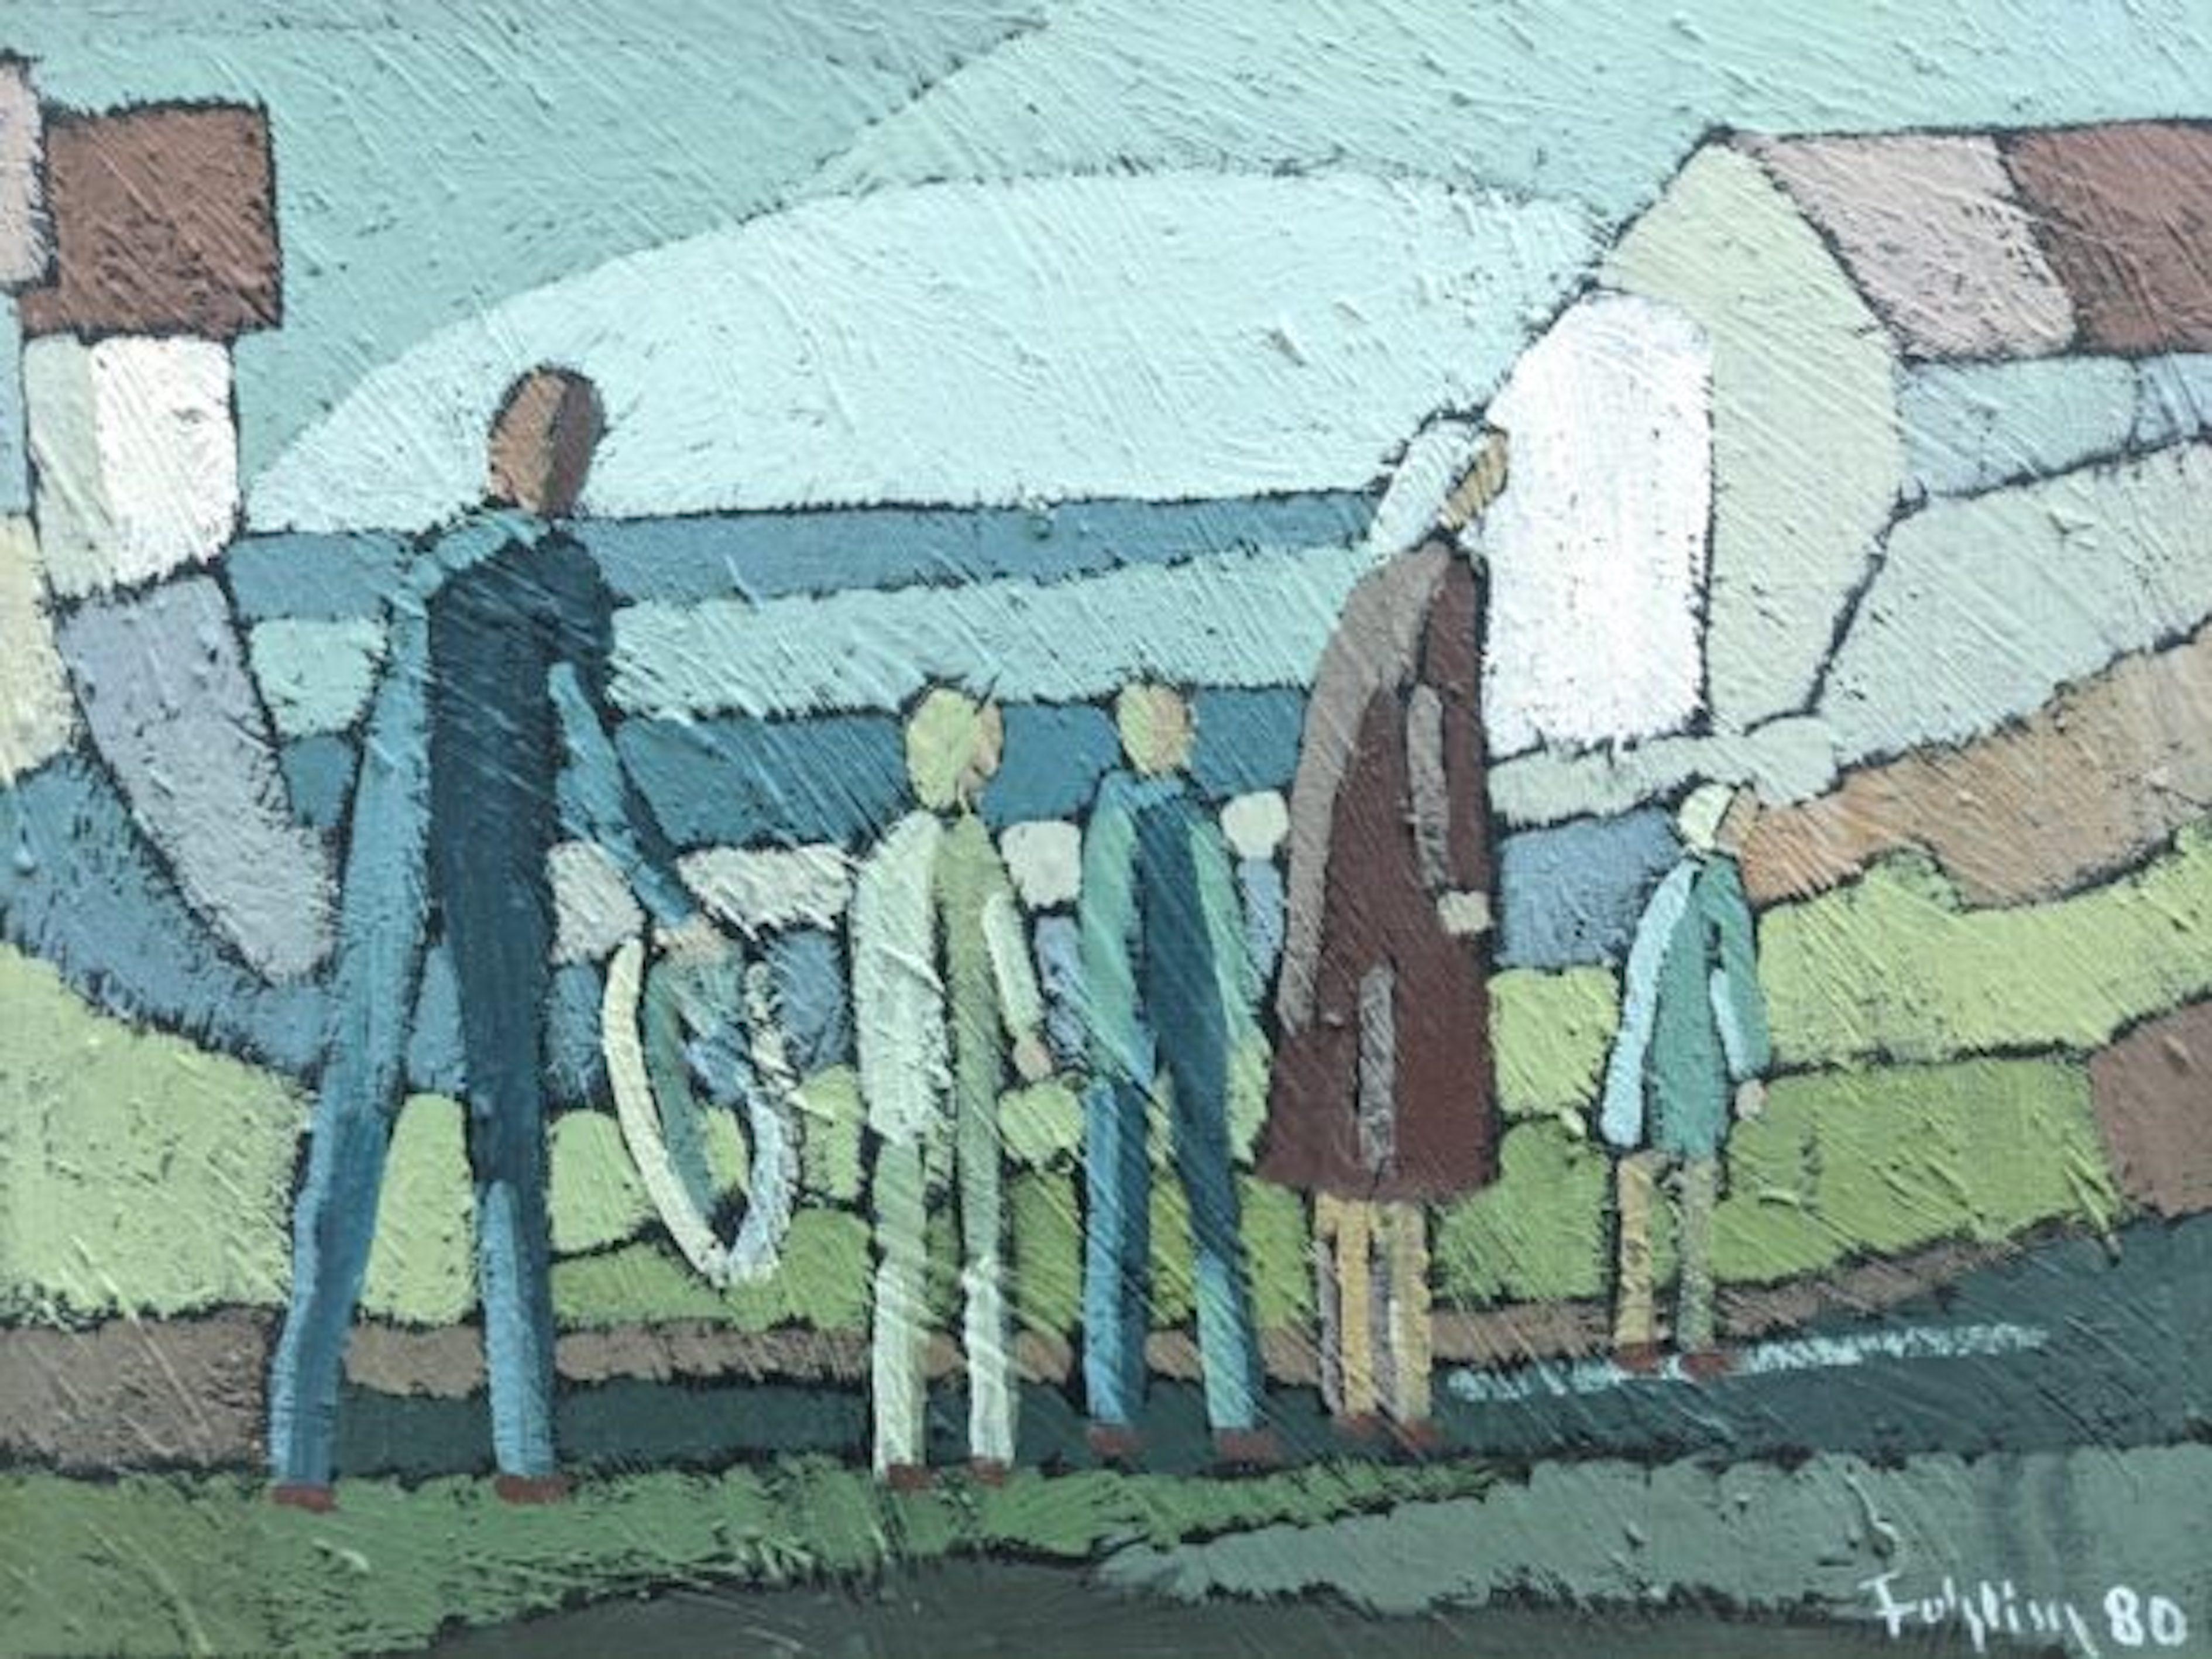 FAMILY
Size: 59.5 x 70.5 cm (including frame)
Oil on Canvas

A modernist oil on canvas depicting a family on a walk, painted in 1980.

Painted with a typically modernist ethos, all realistic details have been condensed down into flat planes of